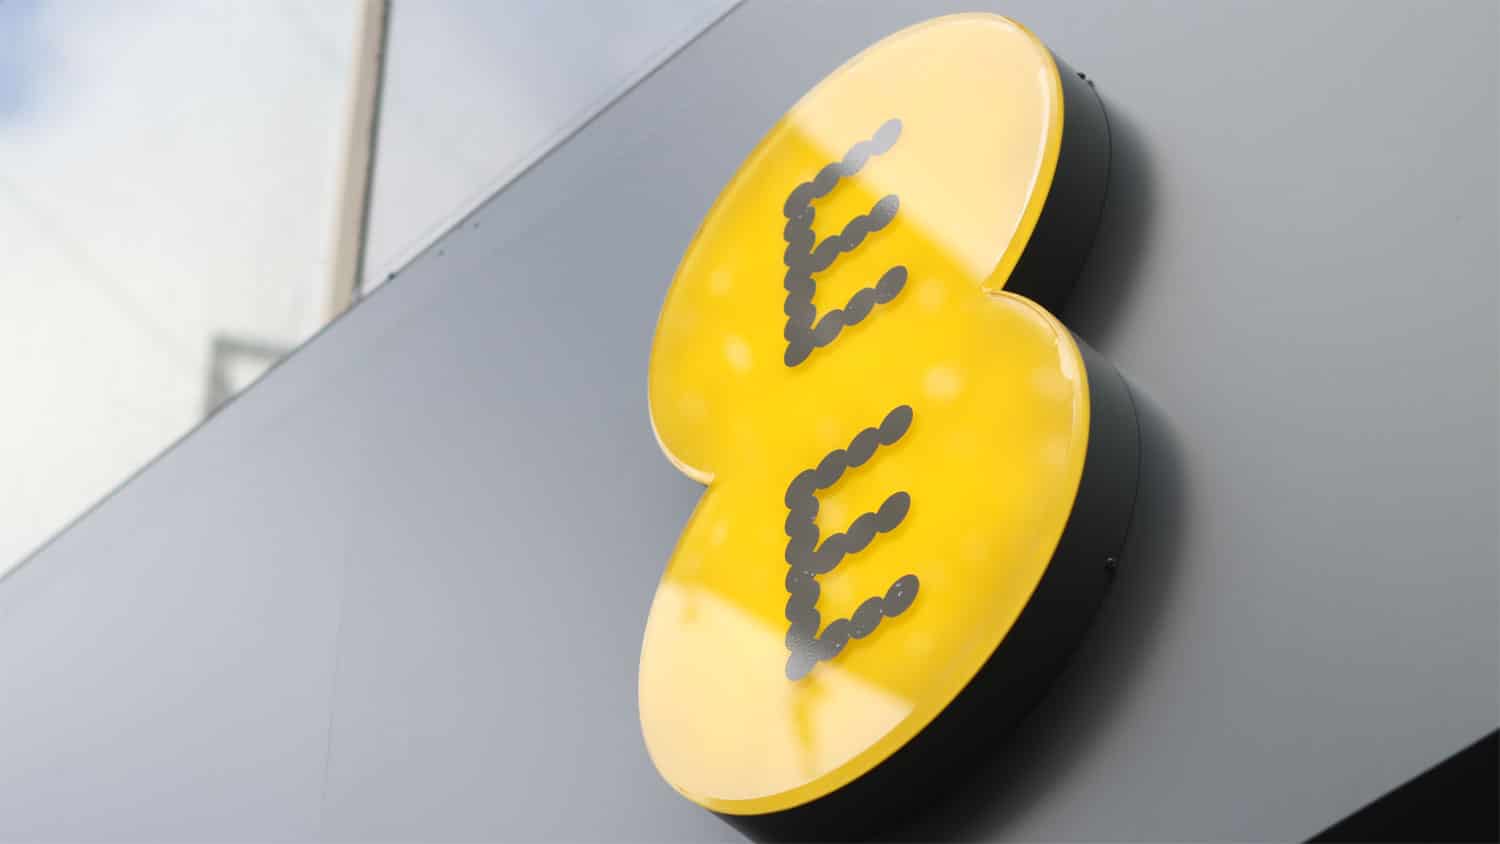 EE Pay As You Go Review: All You Need to Know About Bundles and Packs